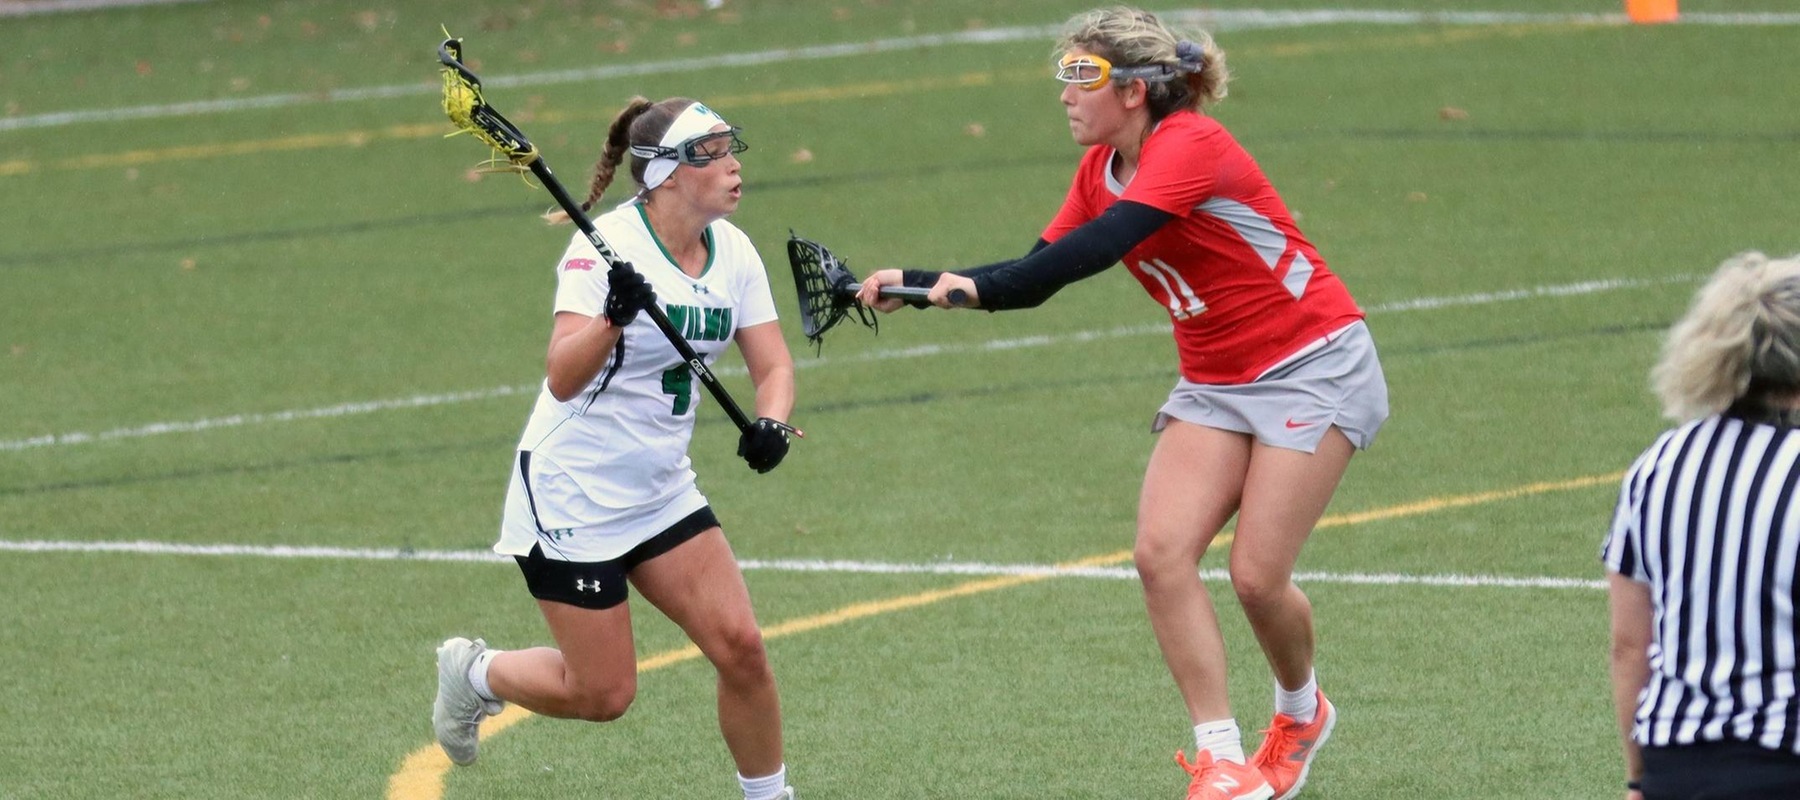 Photo of Maris Allen who scored five goals and added an assist against Chestnut Hill. Copyright 2021; Wilmington University. All rights reserved. Photos by Dan Lauletta. April 14, 2021 vs. Chestnut Hill.